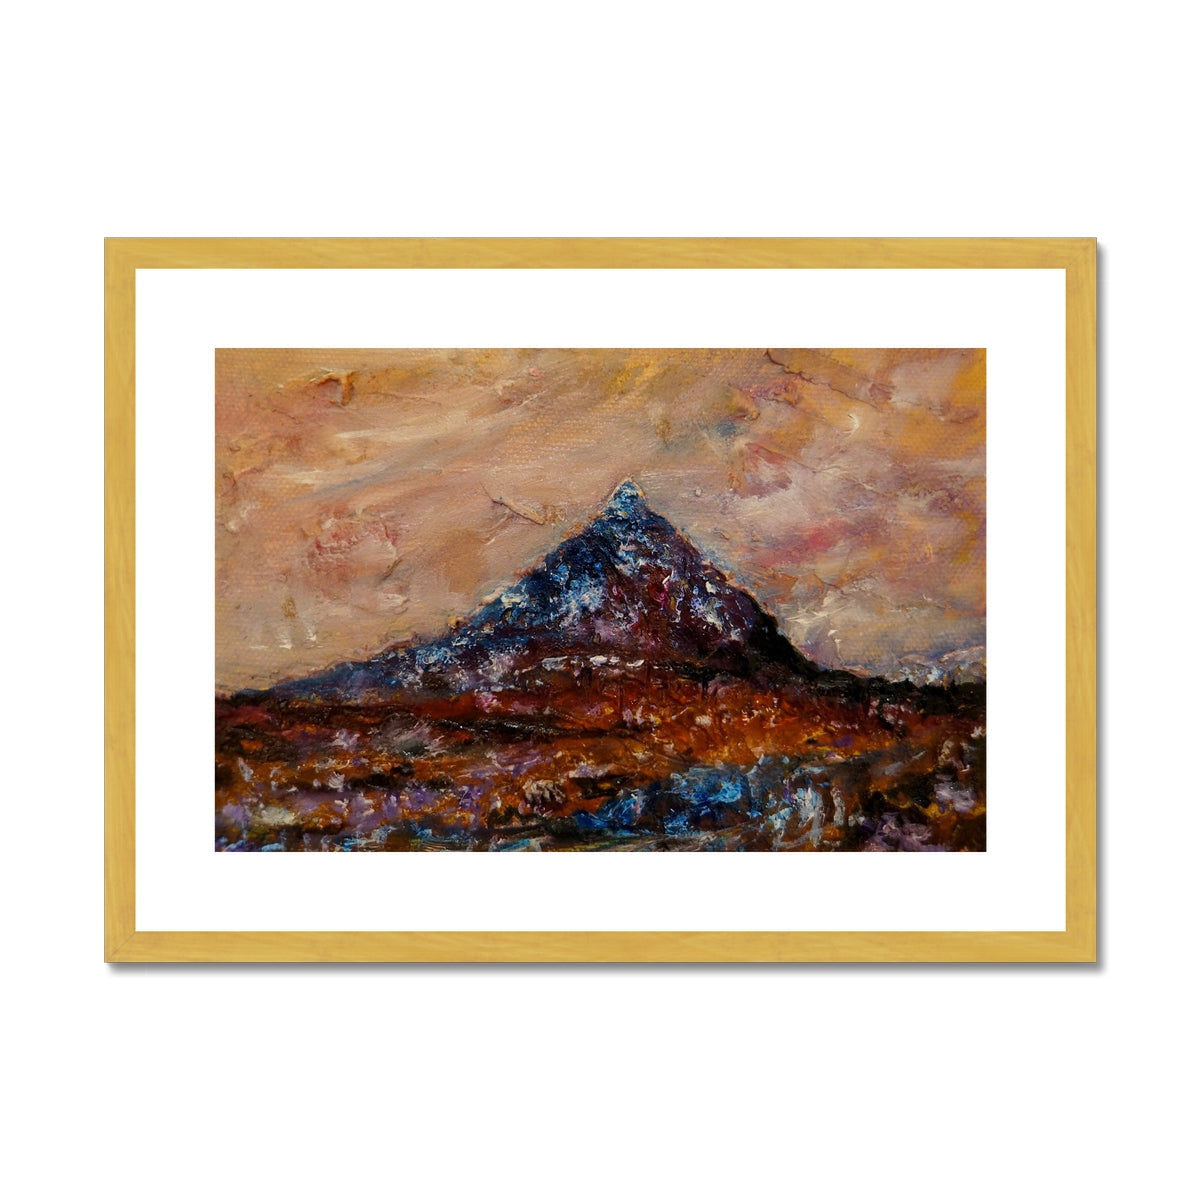 Buachaille Etive Mòr Painting | Antique Framed & Mounted Prints From Scotland-Antique Framed & Mounted Prints-Glencoe Art Gallery-A2 Landscape-Gold Frame-Paintings, Prints, Homeware, Art Gifts From Scotland By Scottish Artist Kevin Hunter